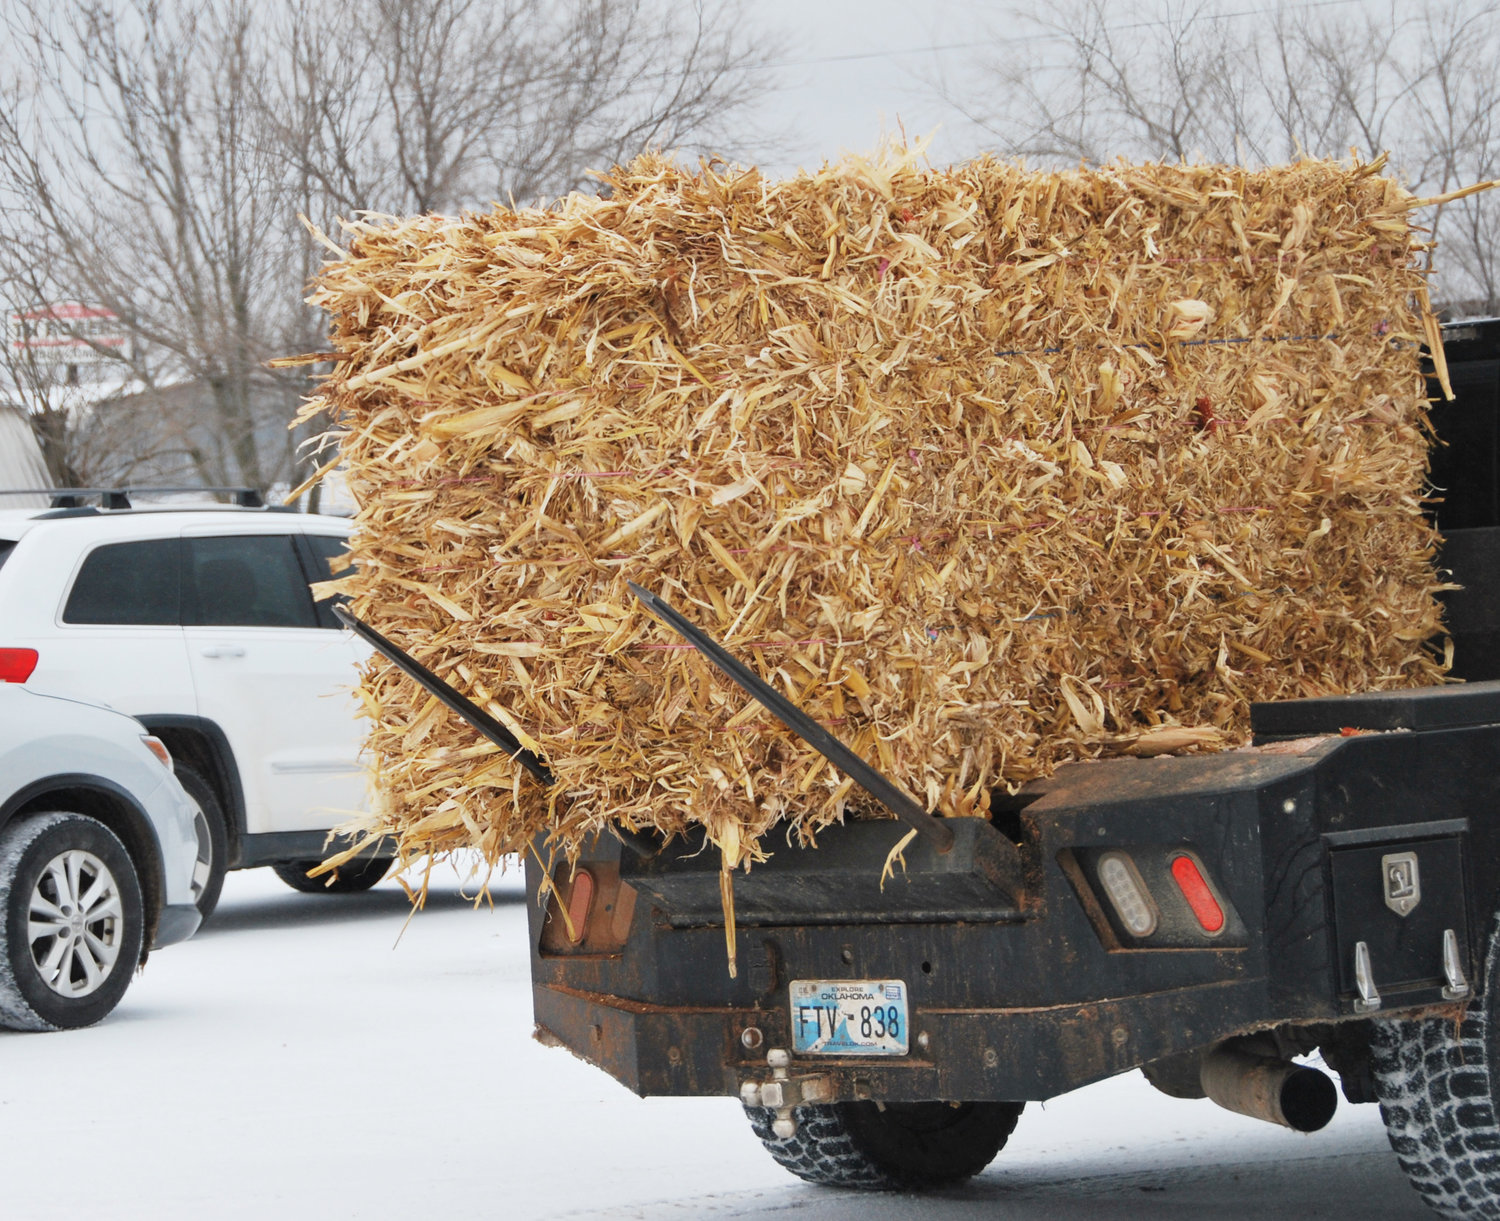 A big square bale of hay was put to good use by this truck during Monday’s ice storm that blew through the state.